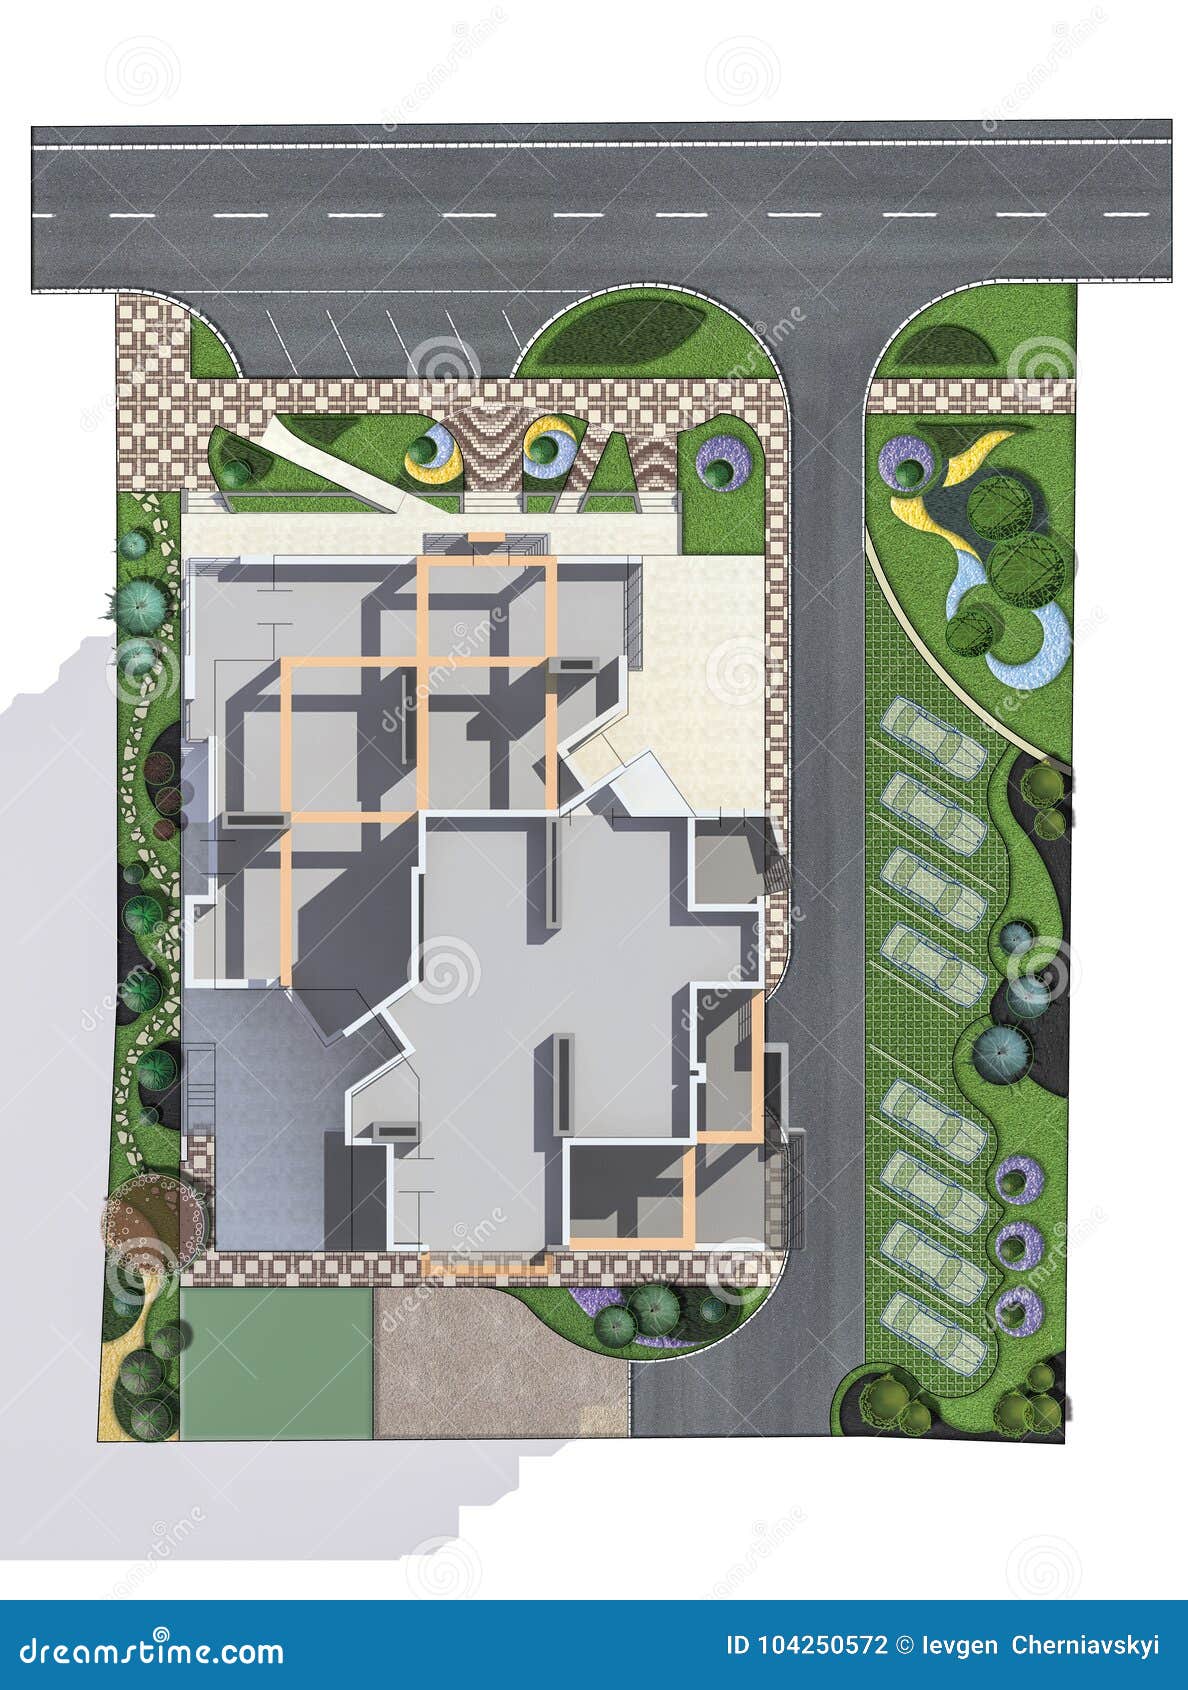 Site development plan section details of the house AutoCAD DWG drawing file  is provided. Download the AutoCAD 2D DWG file. - Cadbull